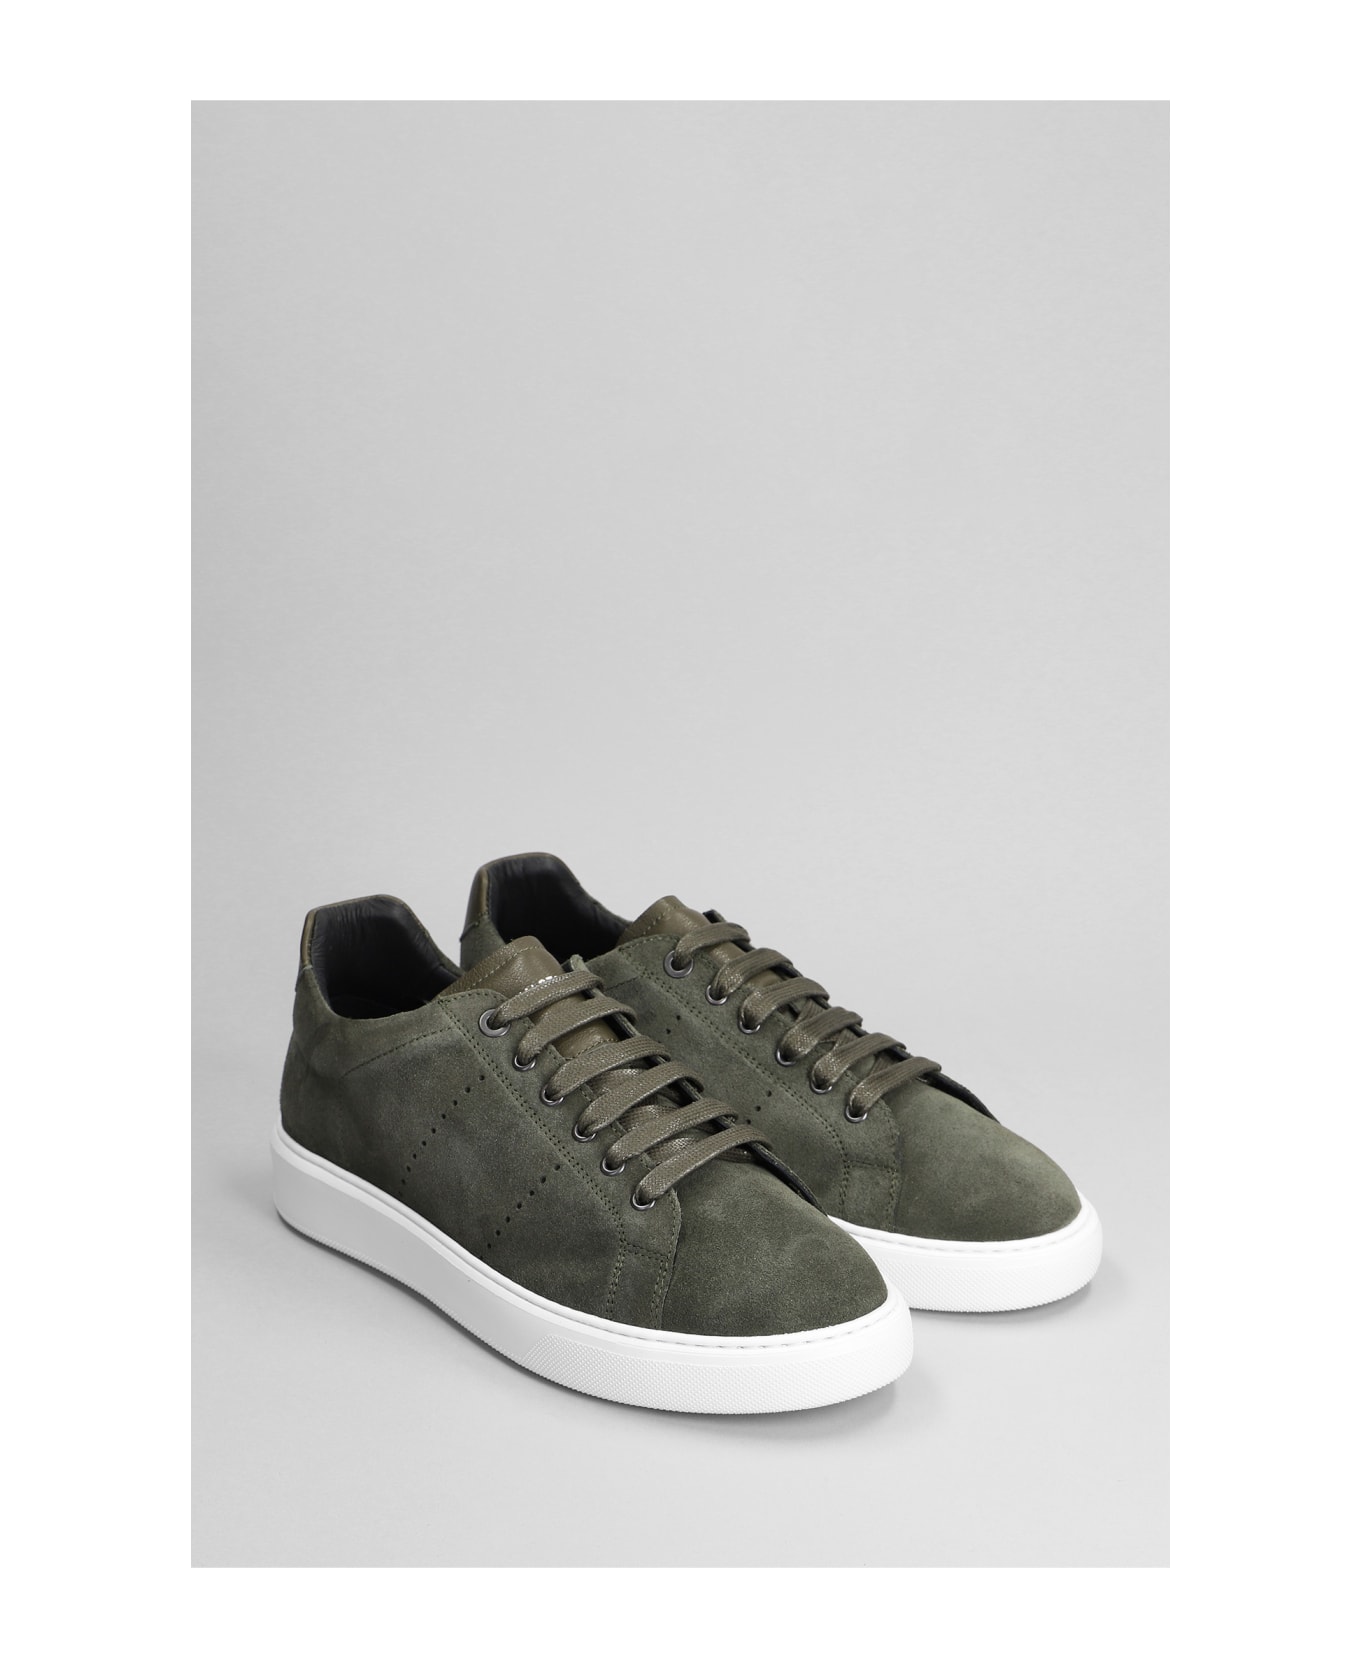 National Standard Edition 9 Sneakers In Khaki Suede - khaki